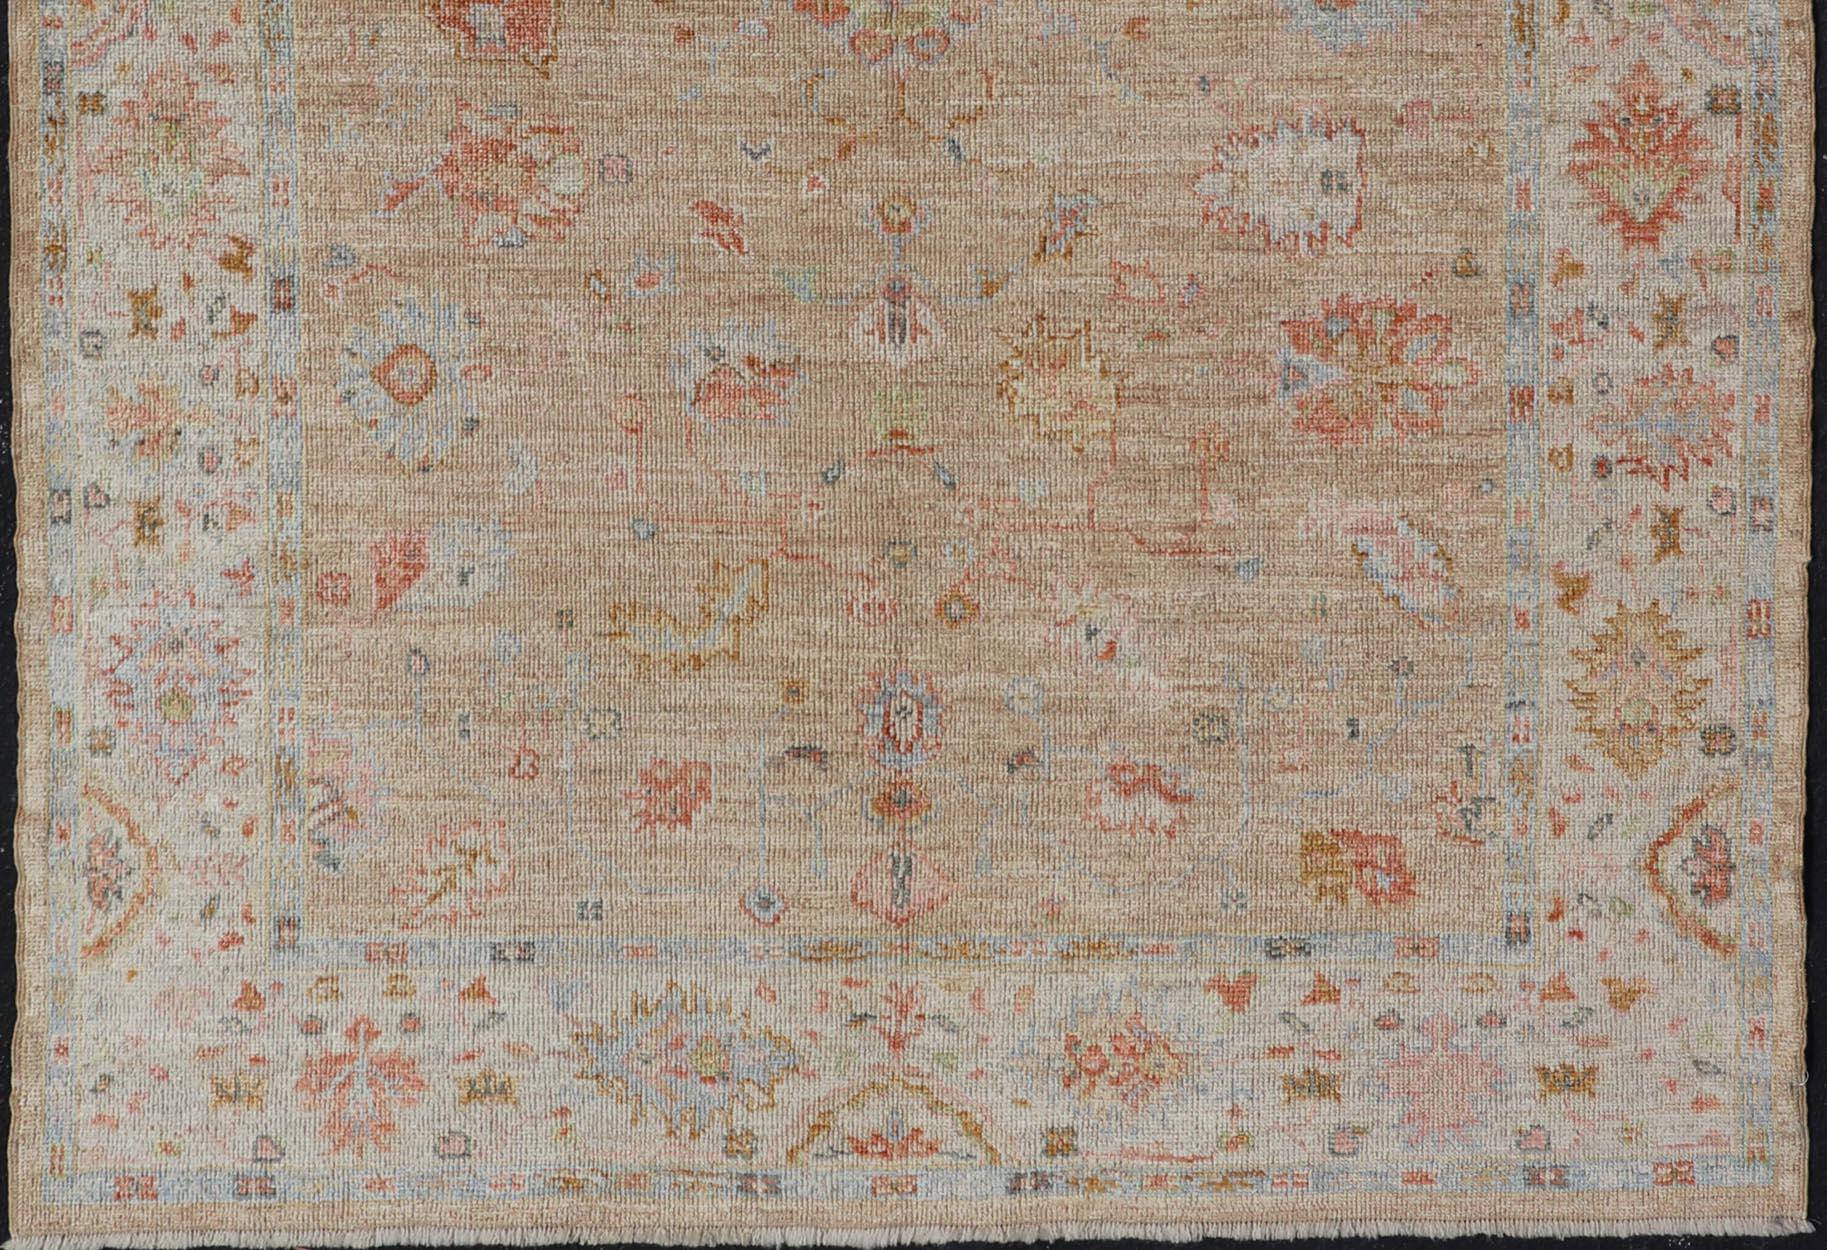 This Turkish Oushak was hand-knotted with angora wool. The field's background is rendered in a sandy-taupe, while the border's background is a cream color. The classic Oushak-floral design displays coral, salmon, maroon, olive green, and hints of